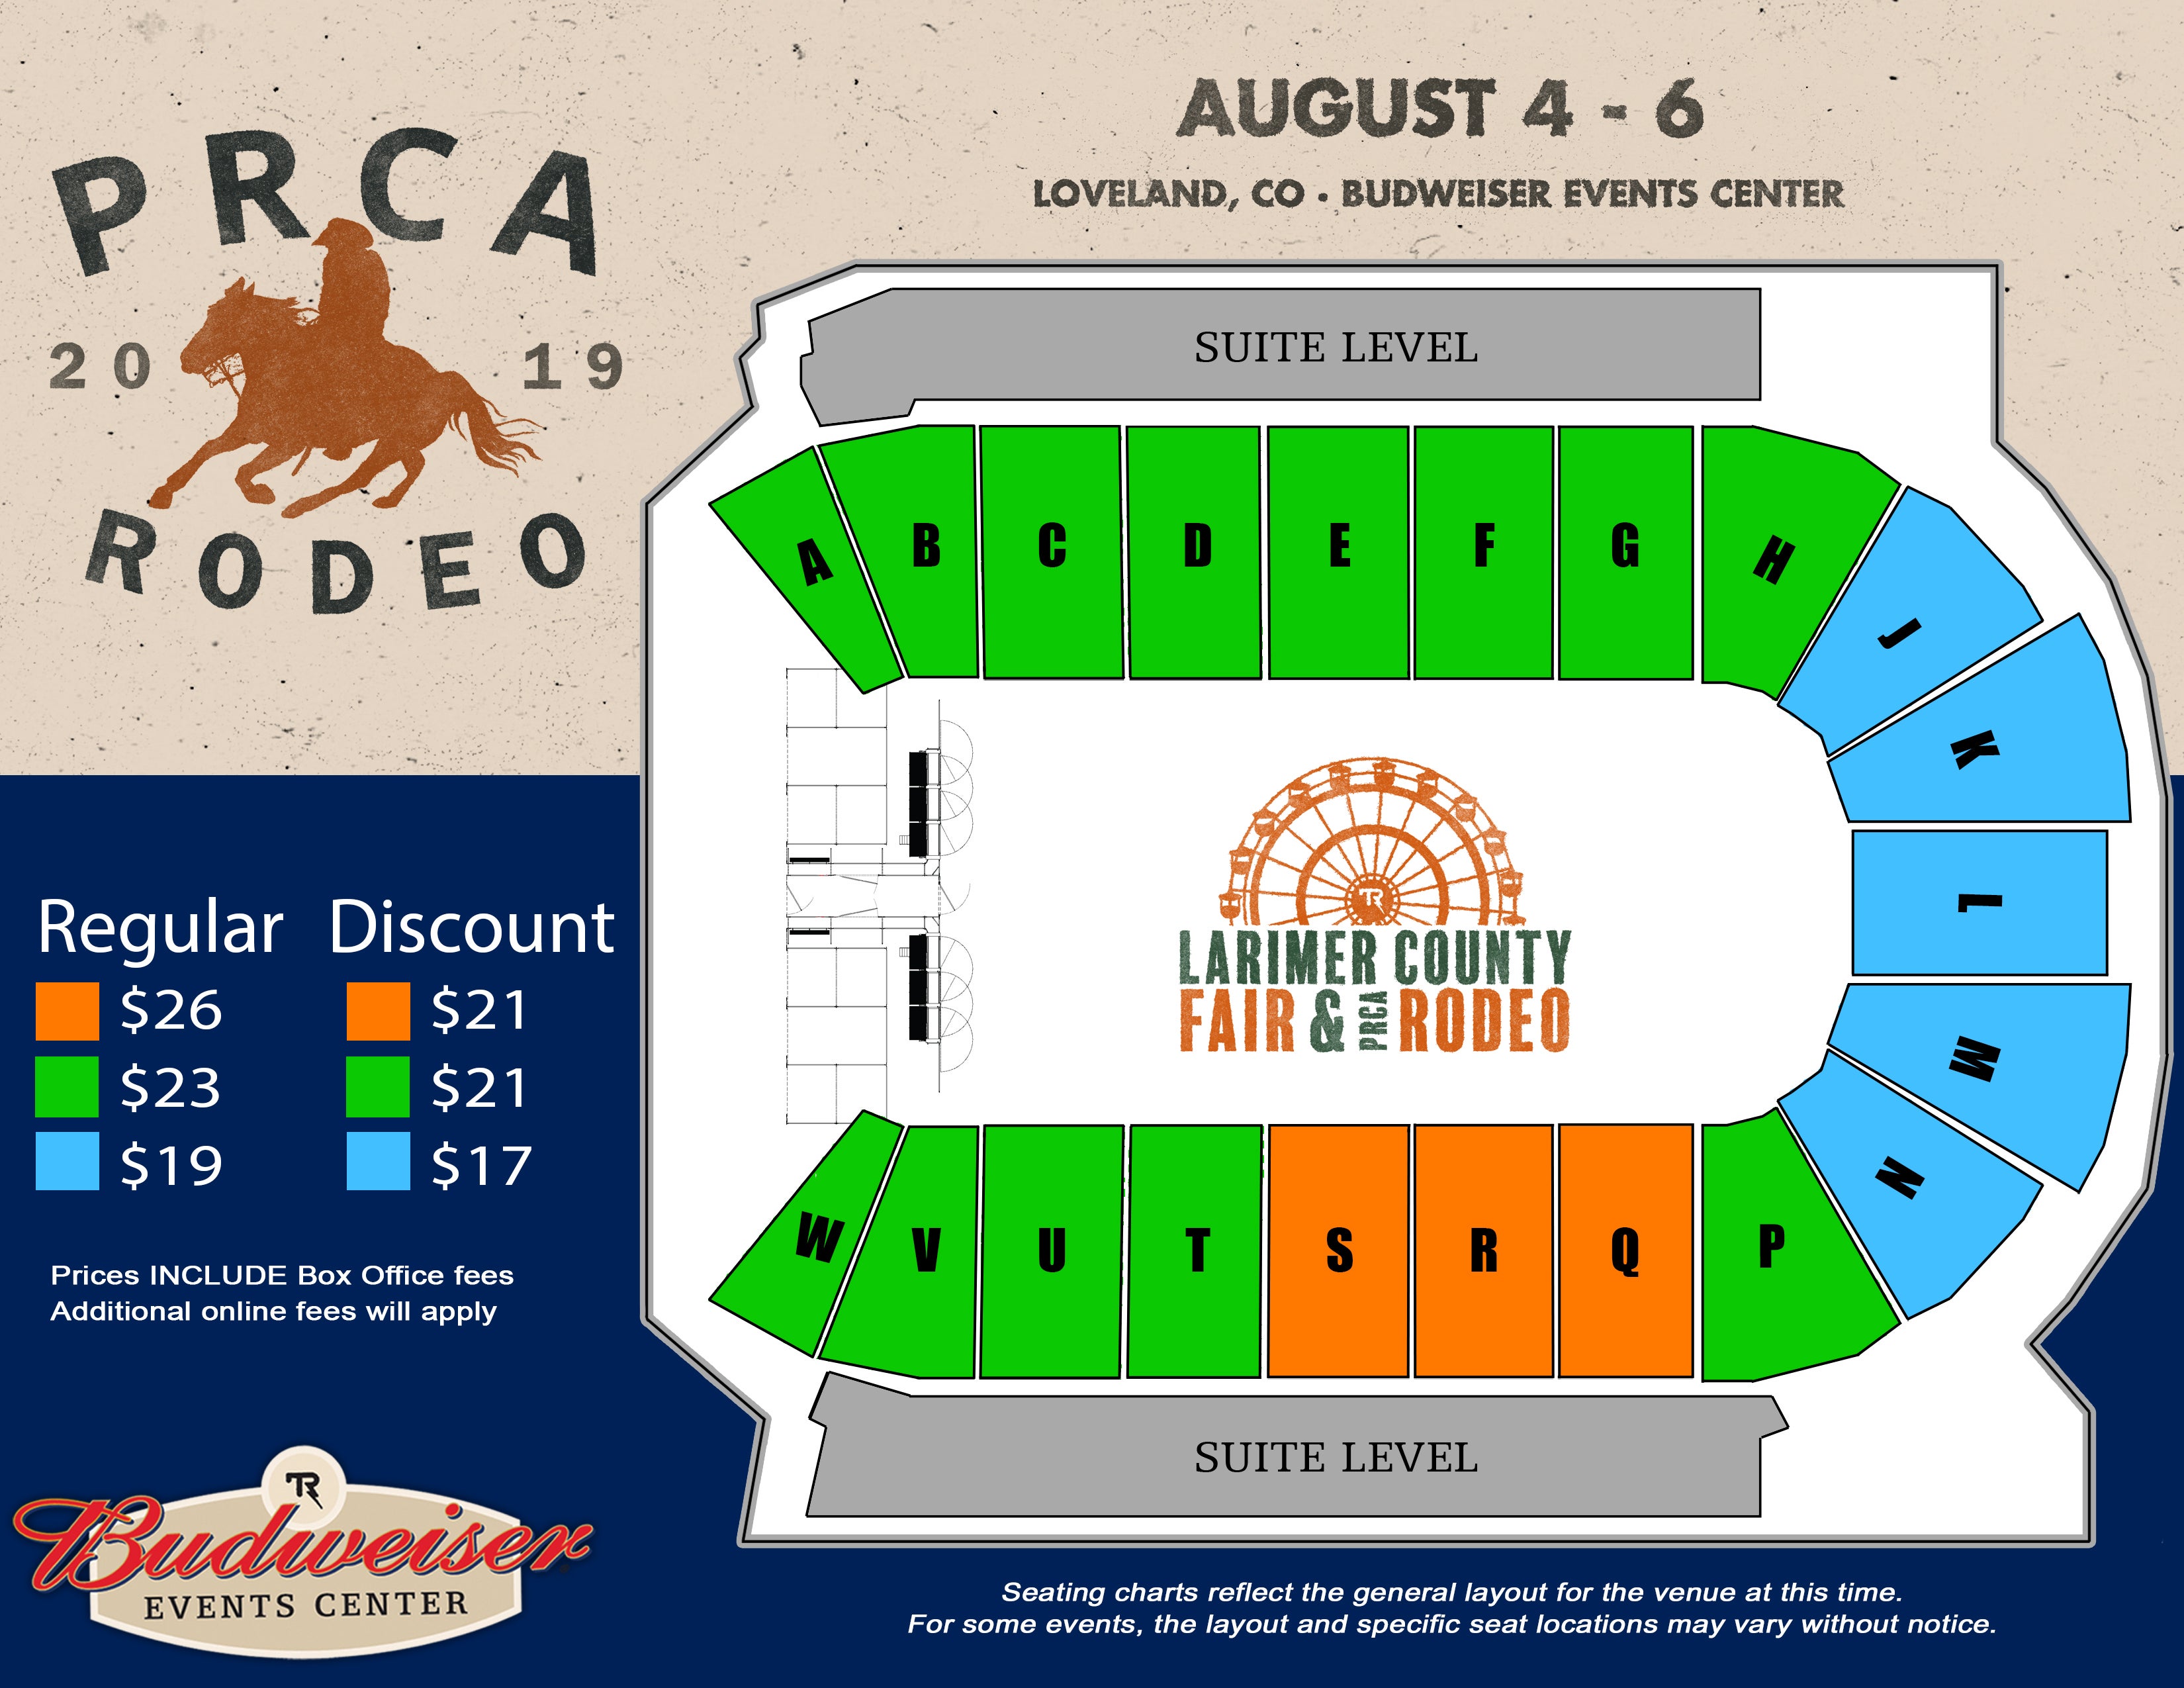 Nfr Rodeo Seating Chart